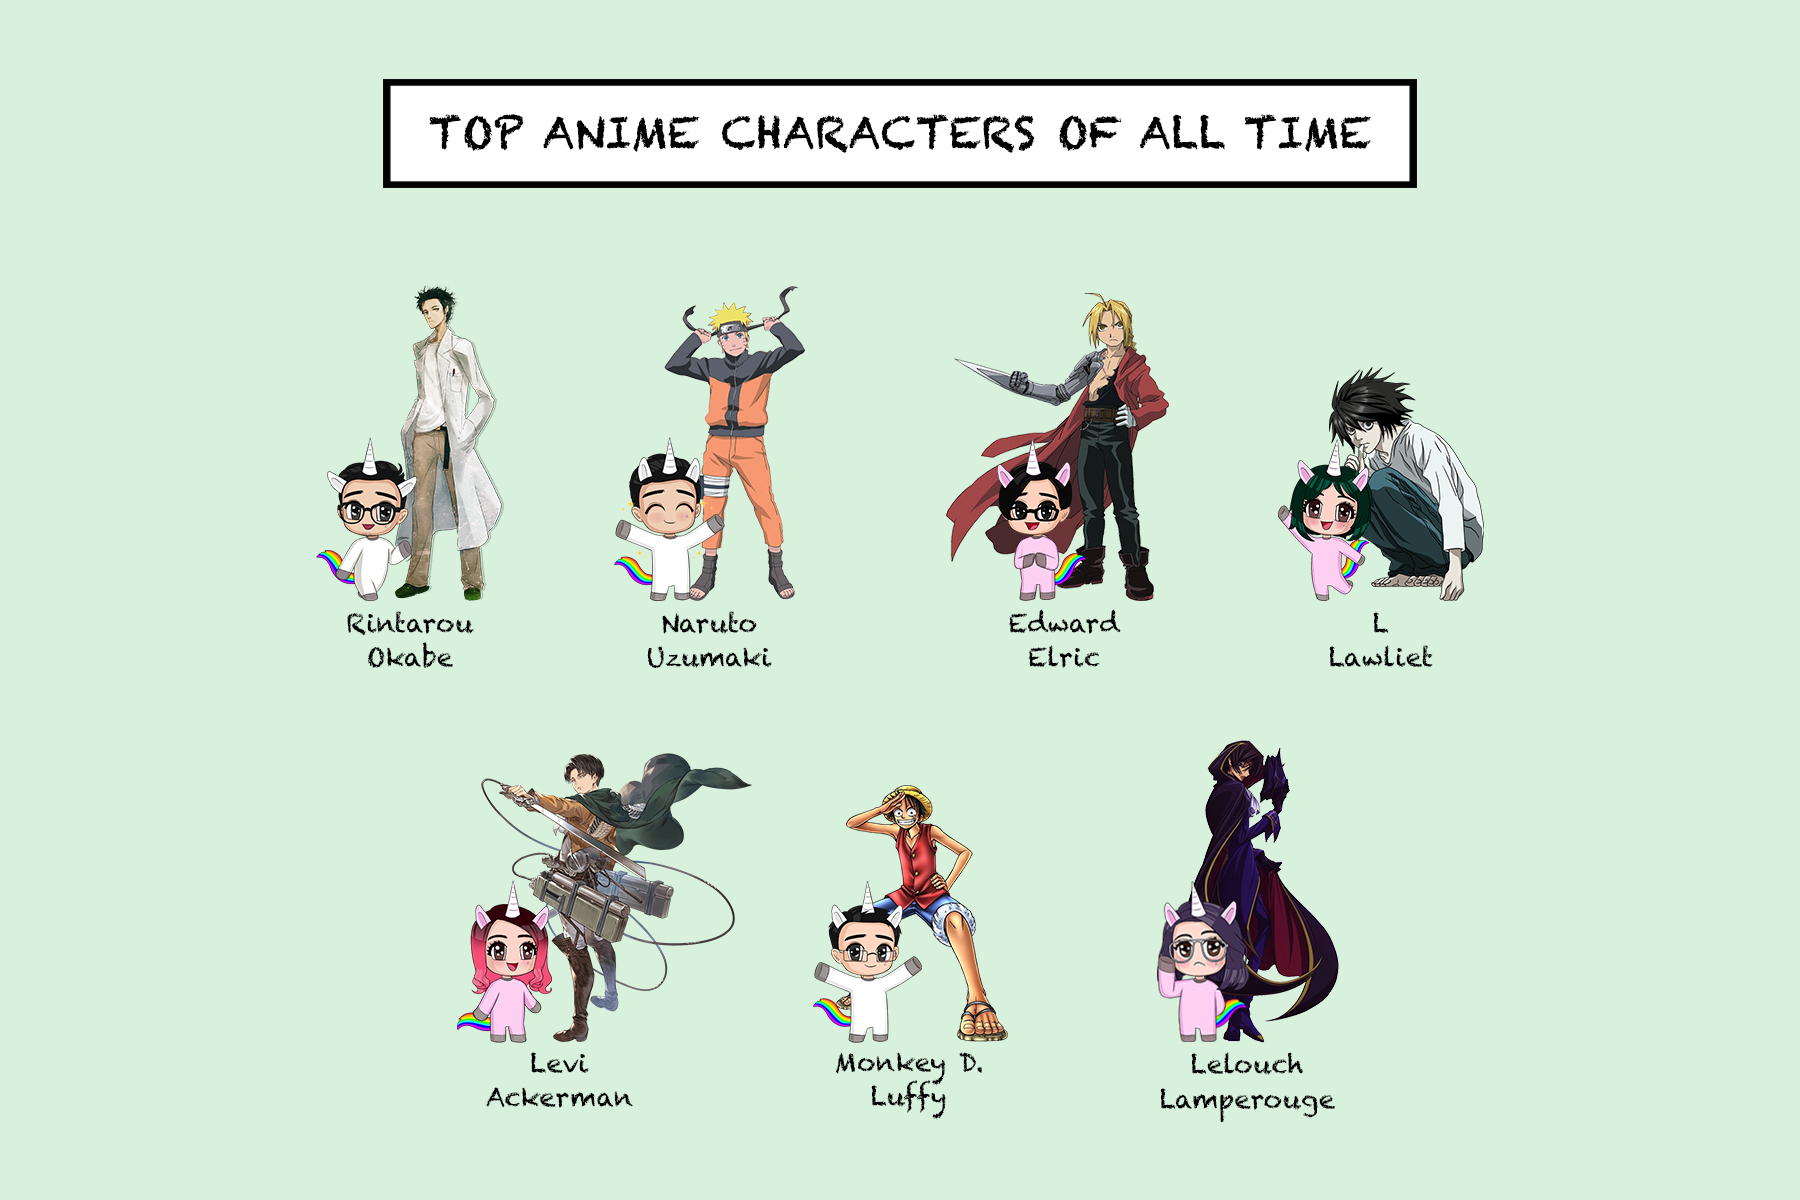 Top 10 Most Popular Anime Characters, According to MyAnimeList